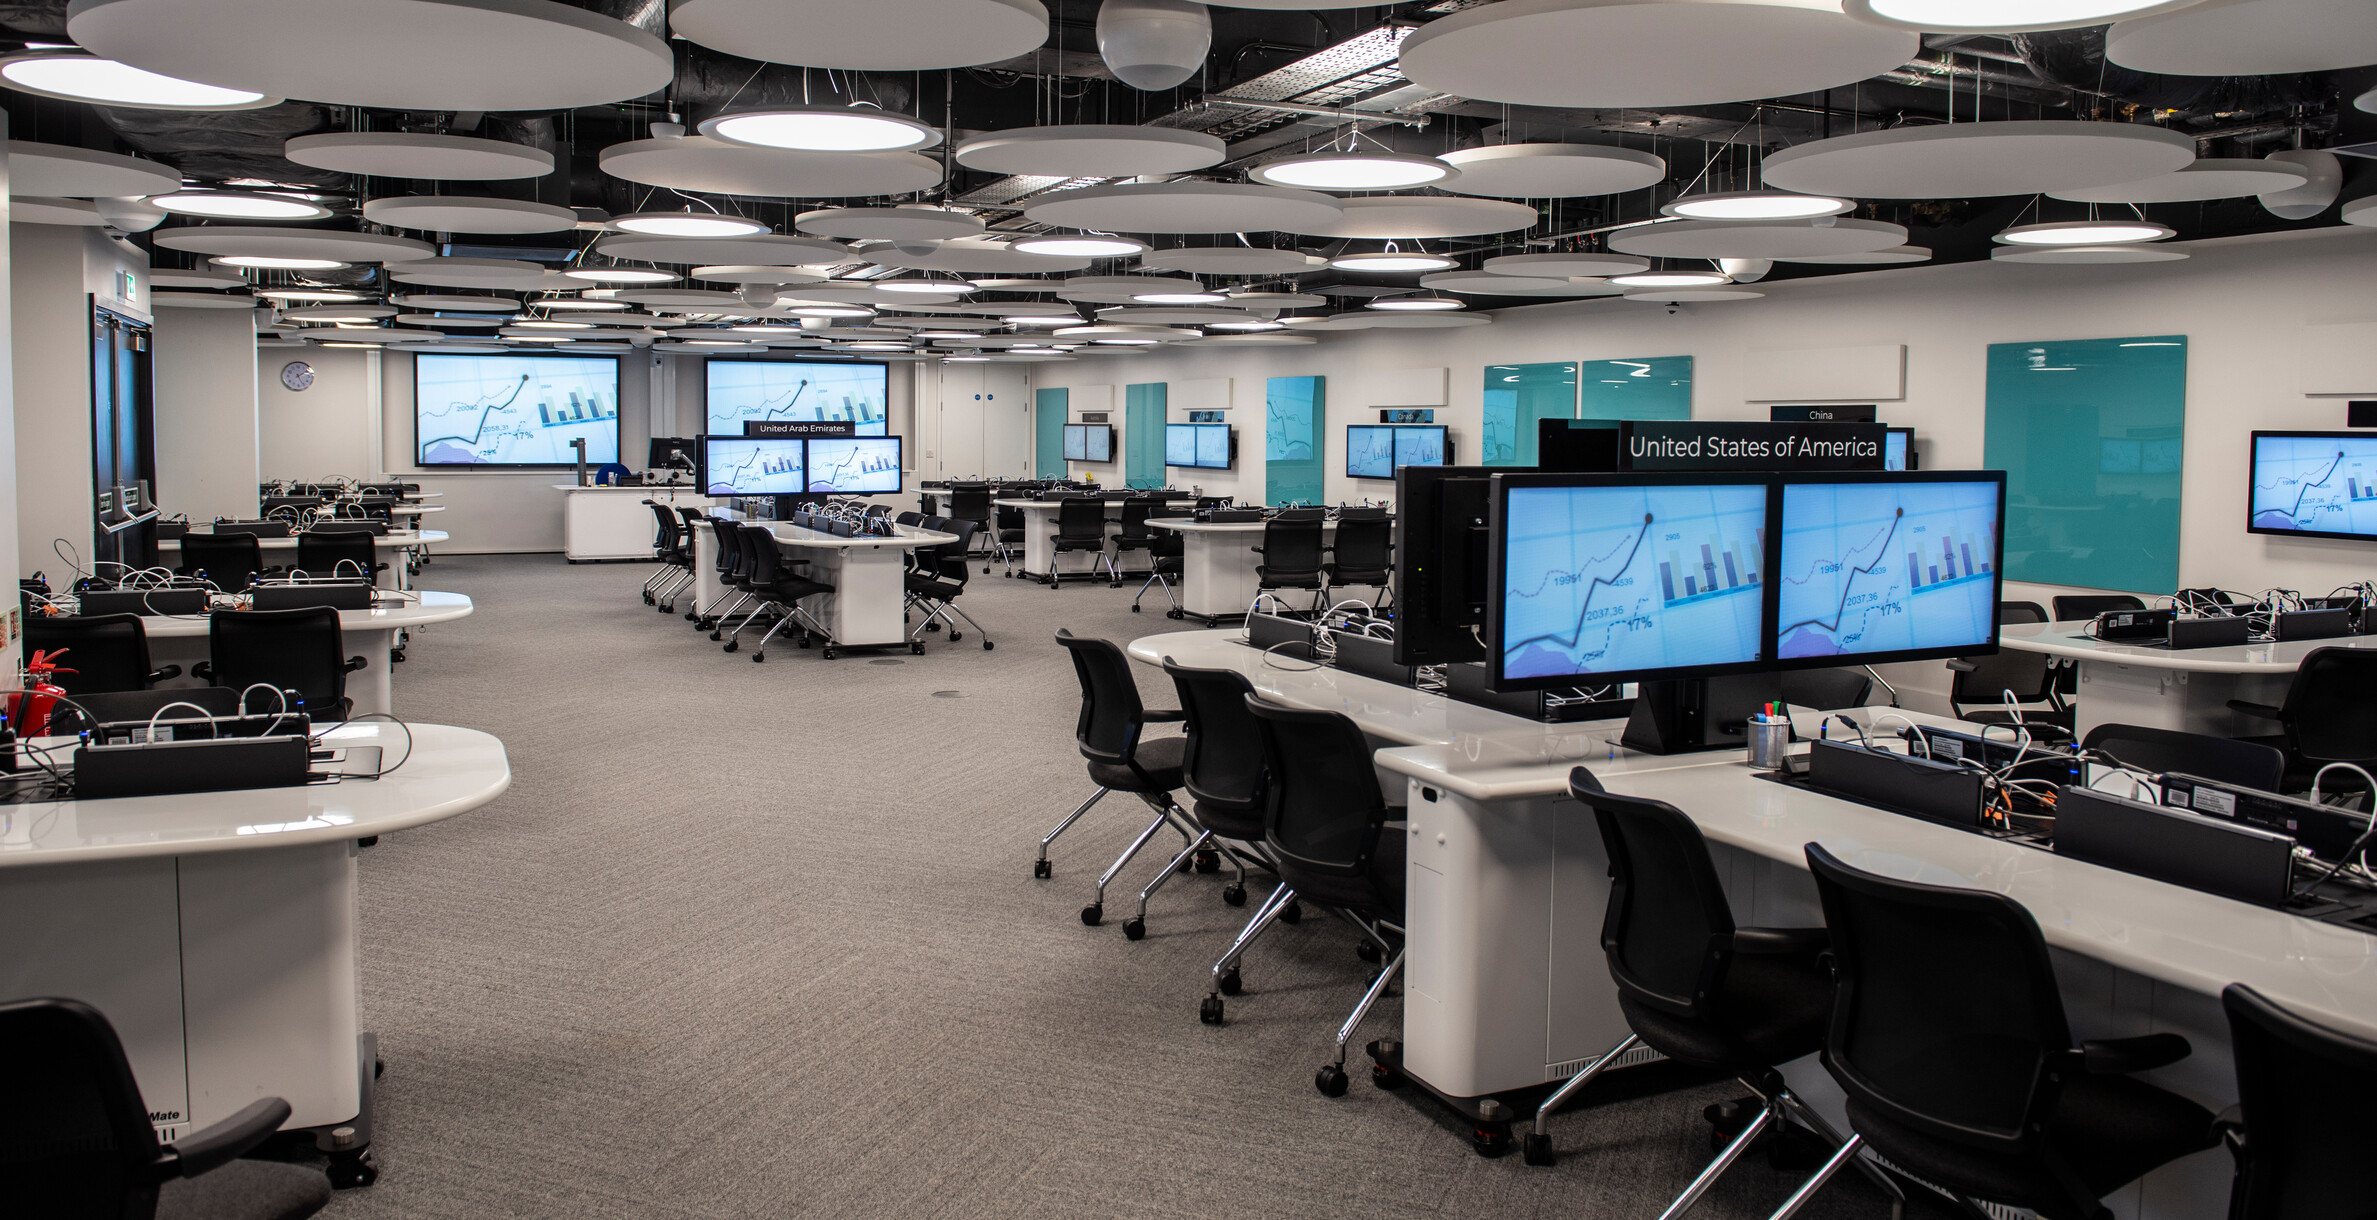 Active learning classroom at London Business school